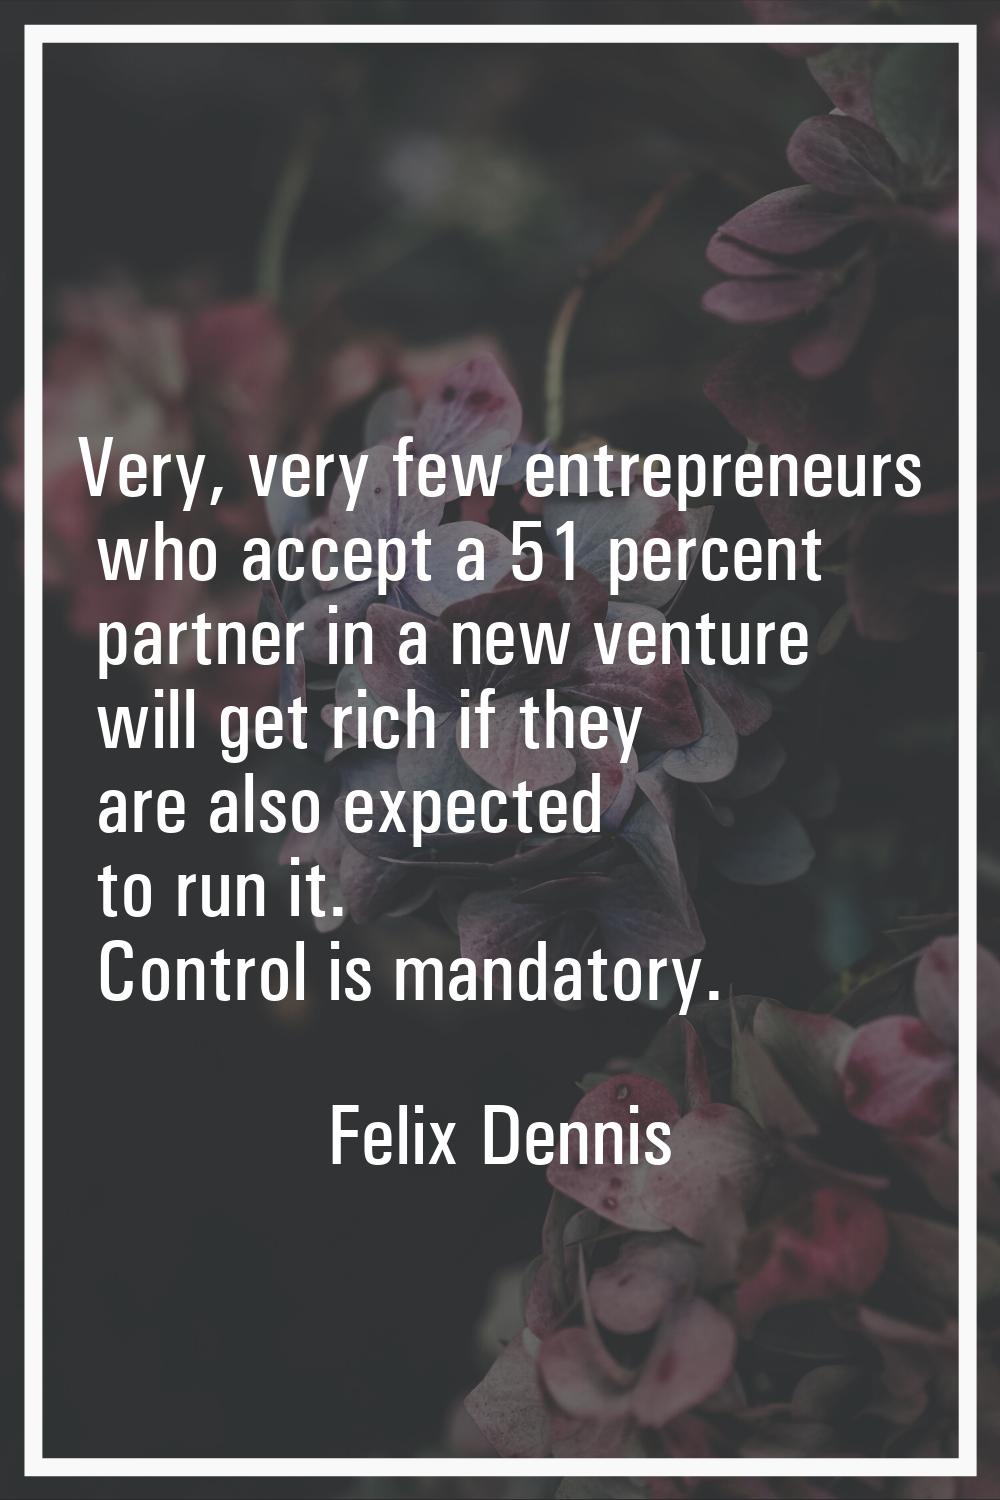 Very, very few entrepreneurs who accept a 51 percent partner in a new venture will get rich if they